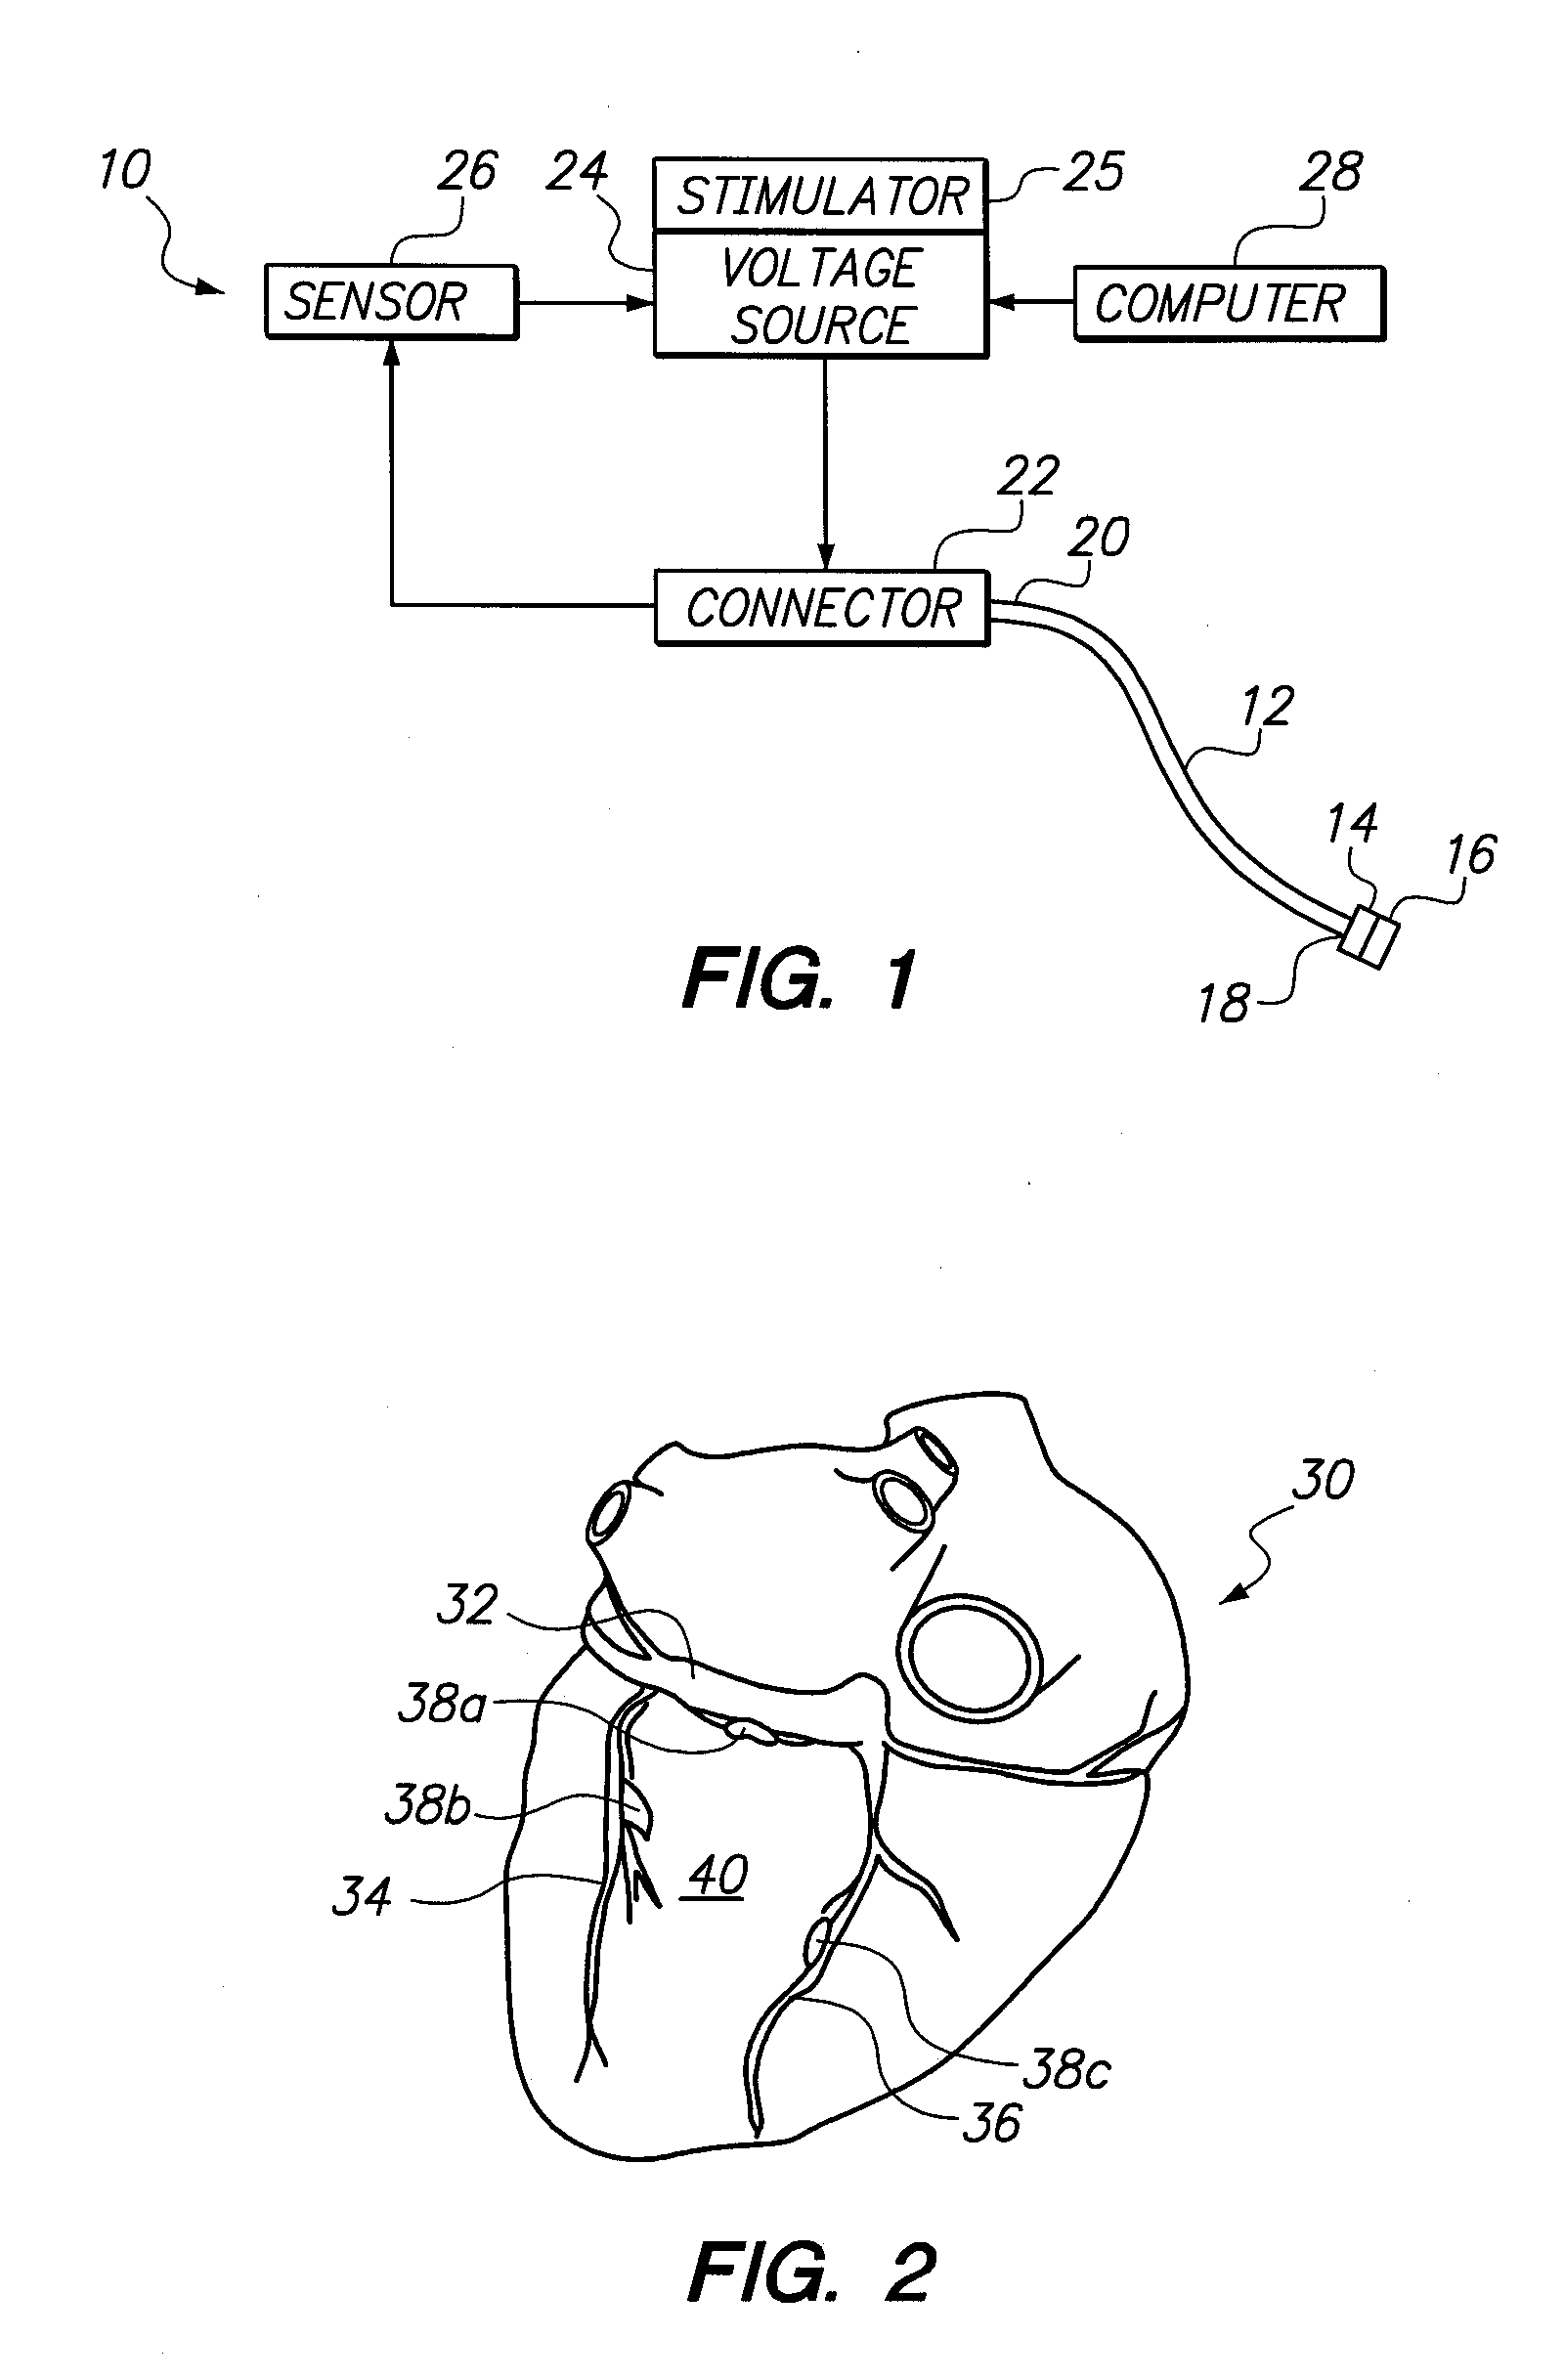 System and Method for Transvascular Activation of Cardiac Nerves with Automatic Restart